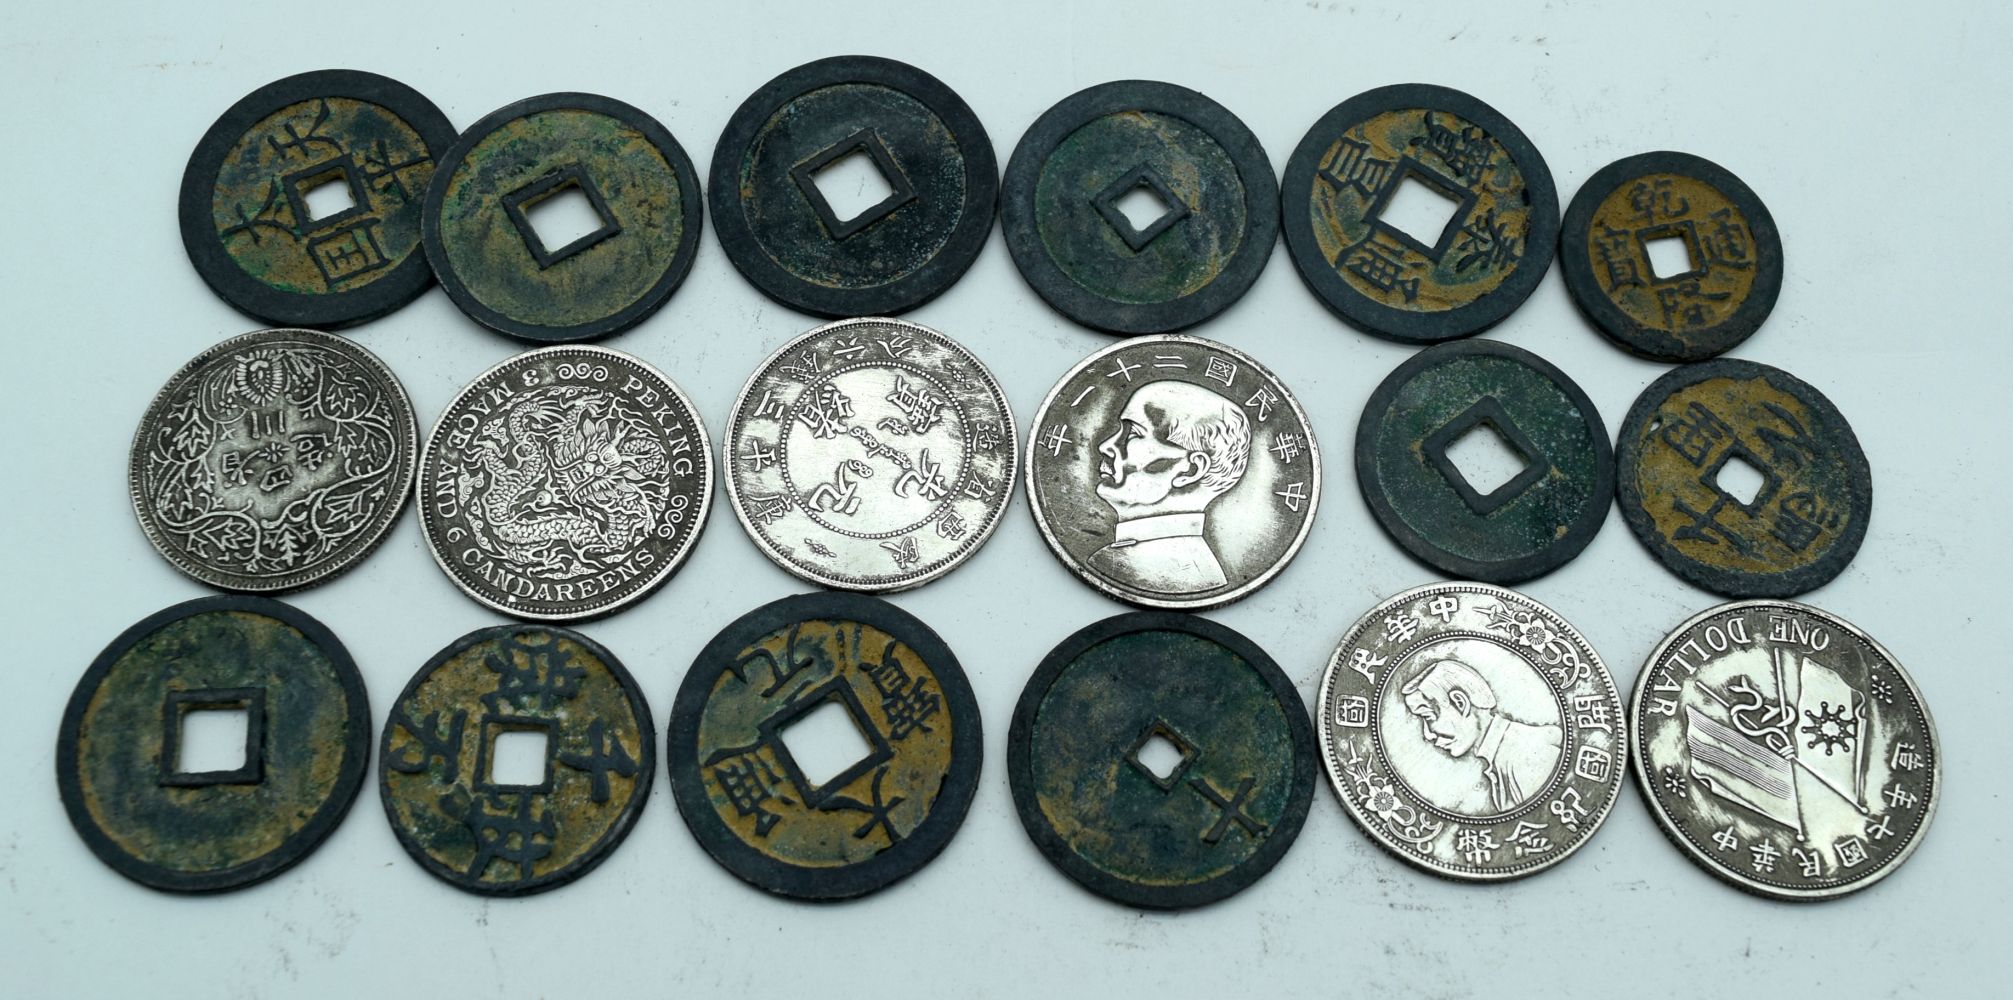 A collection of Chinese coins and tokens